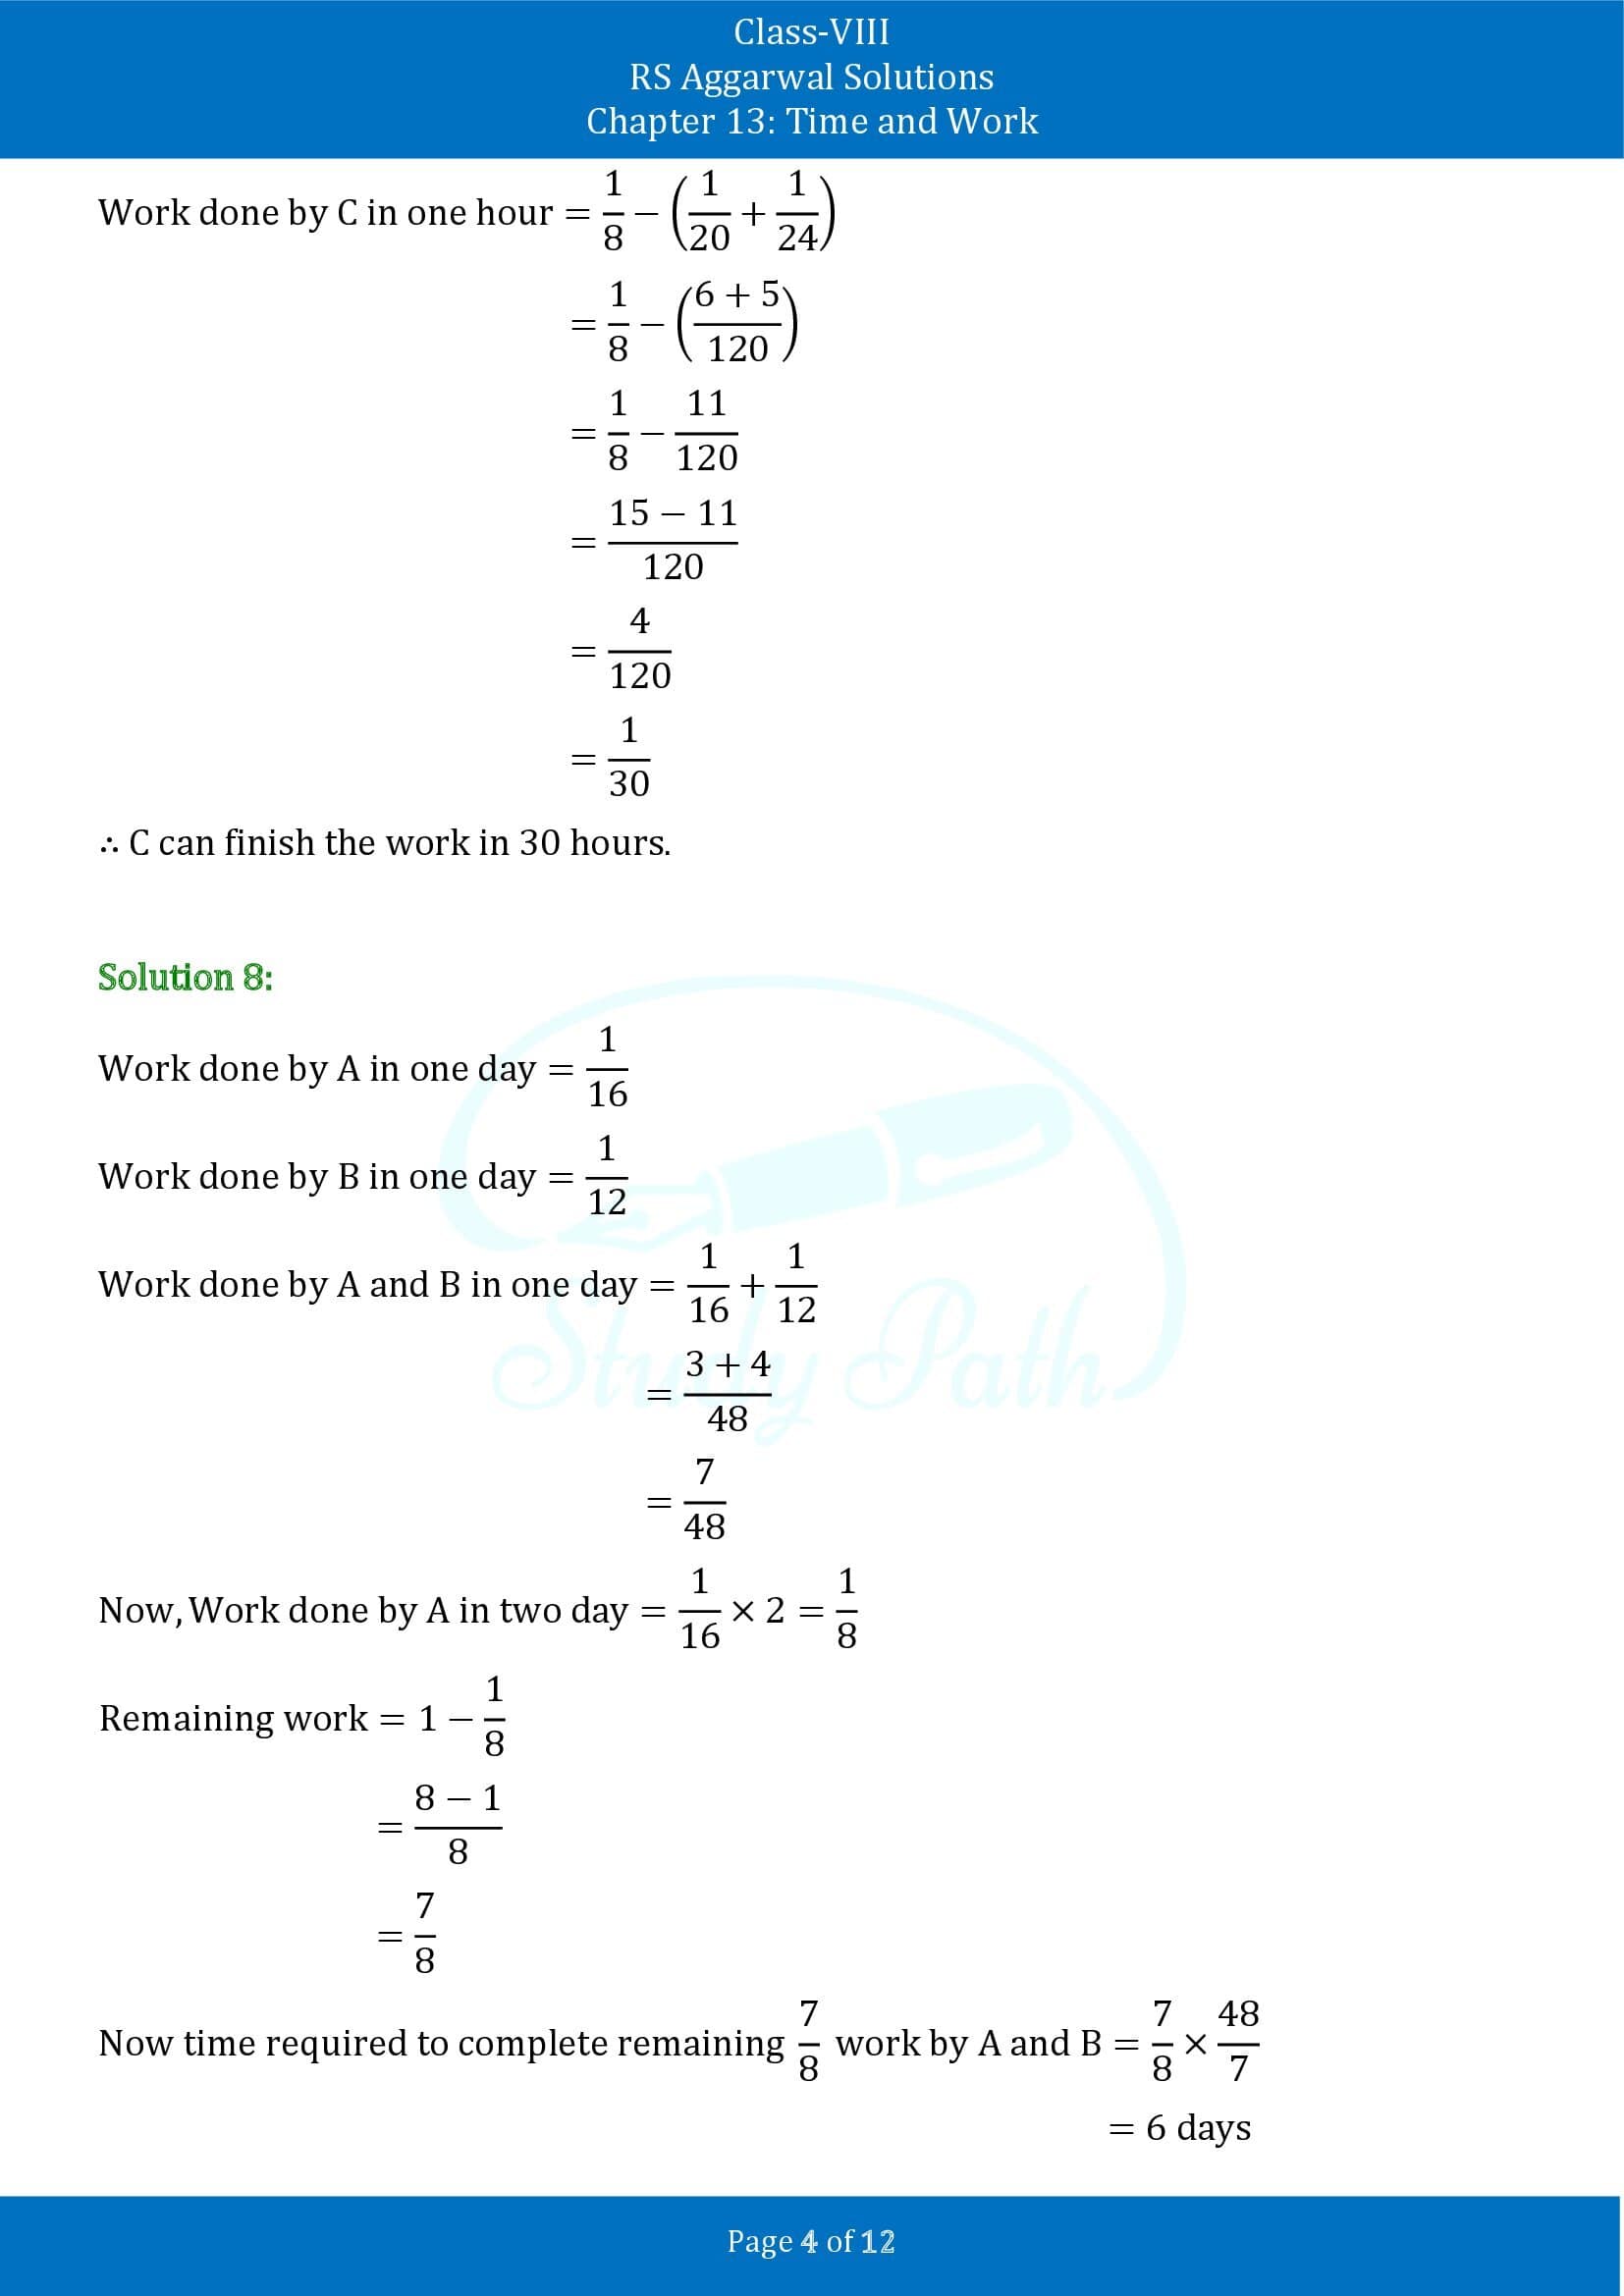 RS Aggarwal Solutions Class 8 Chapter 13 Time and Work Exercise 13A 00004